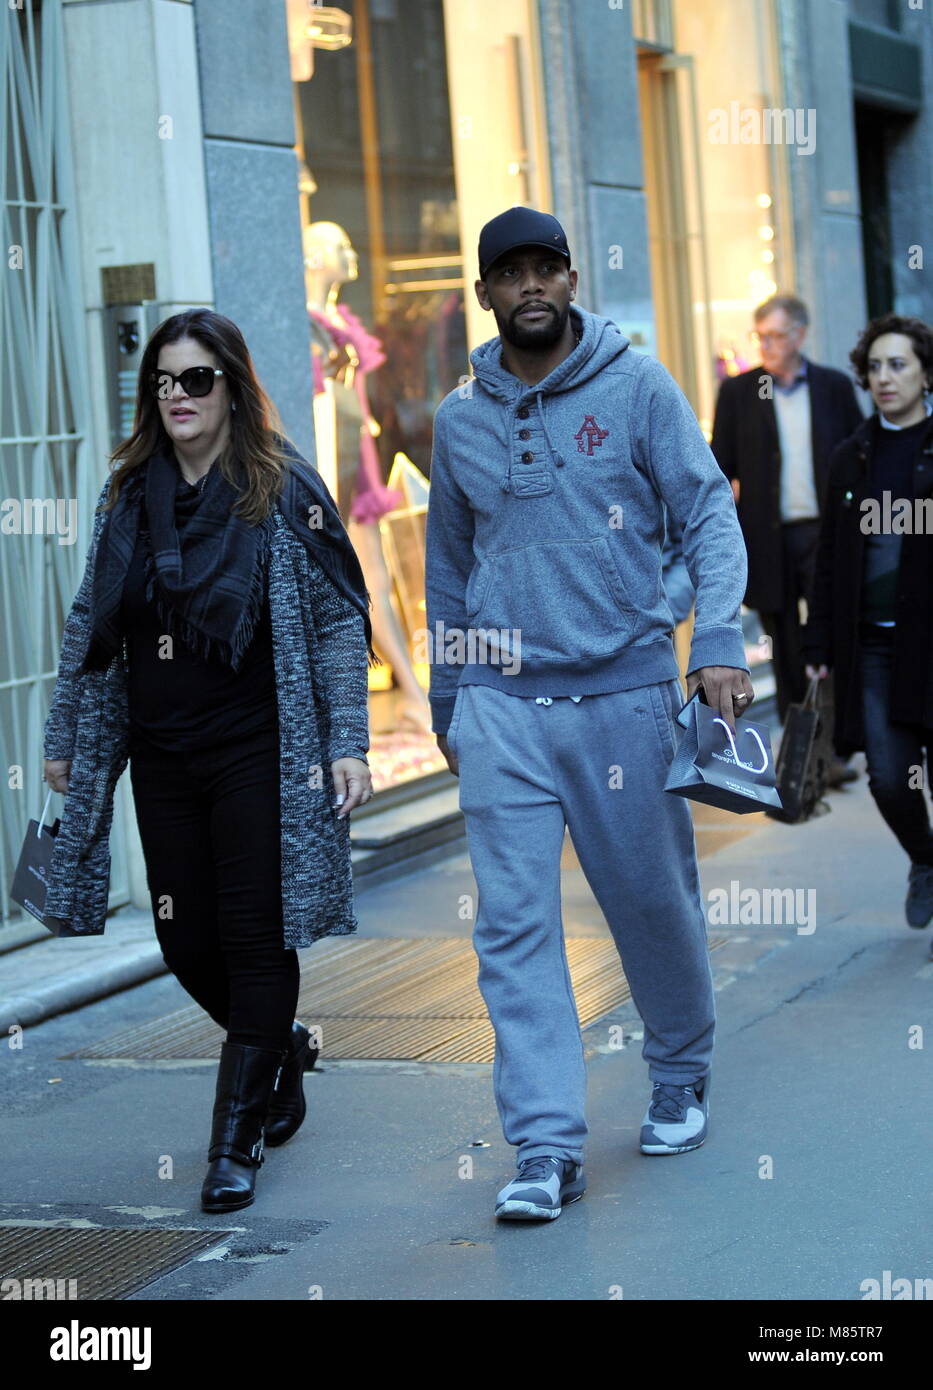 Milan, Maicon in the center of a walk with his wife Maicon Douglas Sisenado, the Brazilian champion known to all simply as MAICON, former defender of the INTER and the national team of Brazil, is now busy with the AVAI team in the carioca championship. Here he is walking in the late afternoon in Via Montenapoleone with his wife. Stock Photo